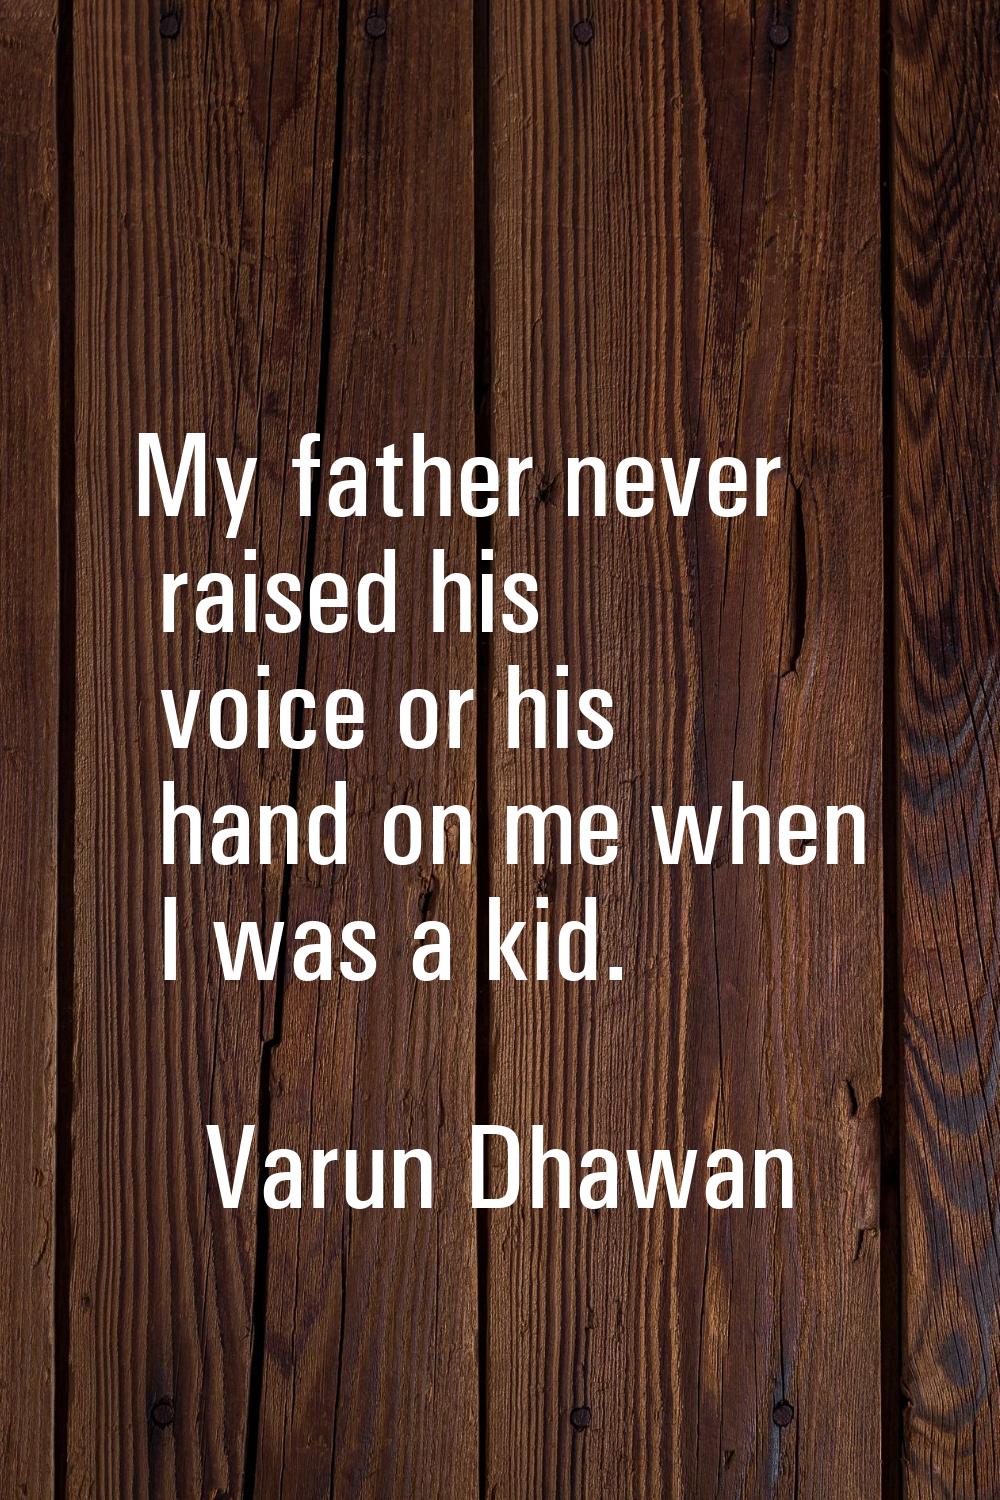 My father never raised his voice or his hand on me when I was a kid.